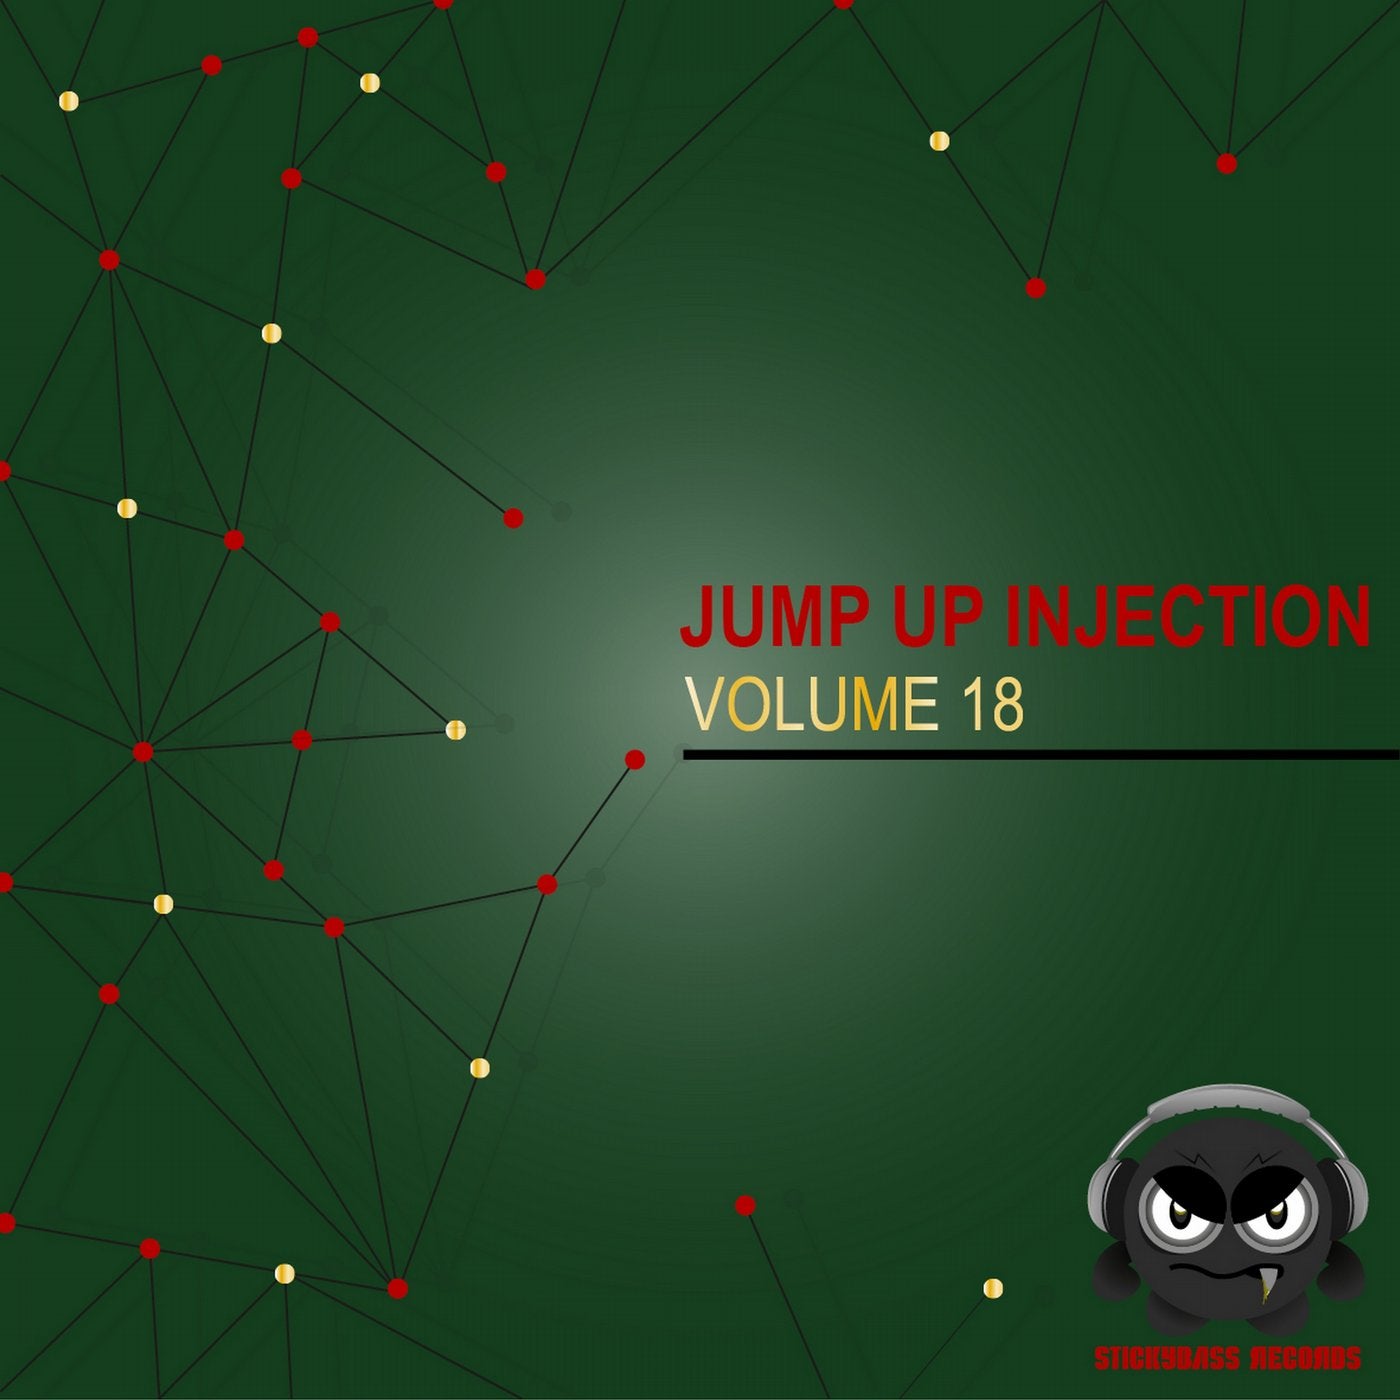 Jump up Injection, Vol. 18